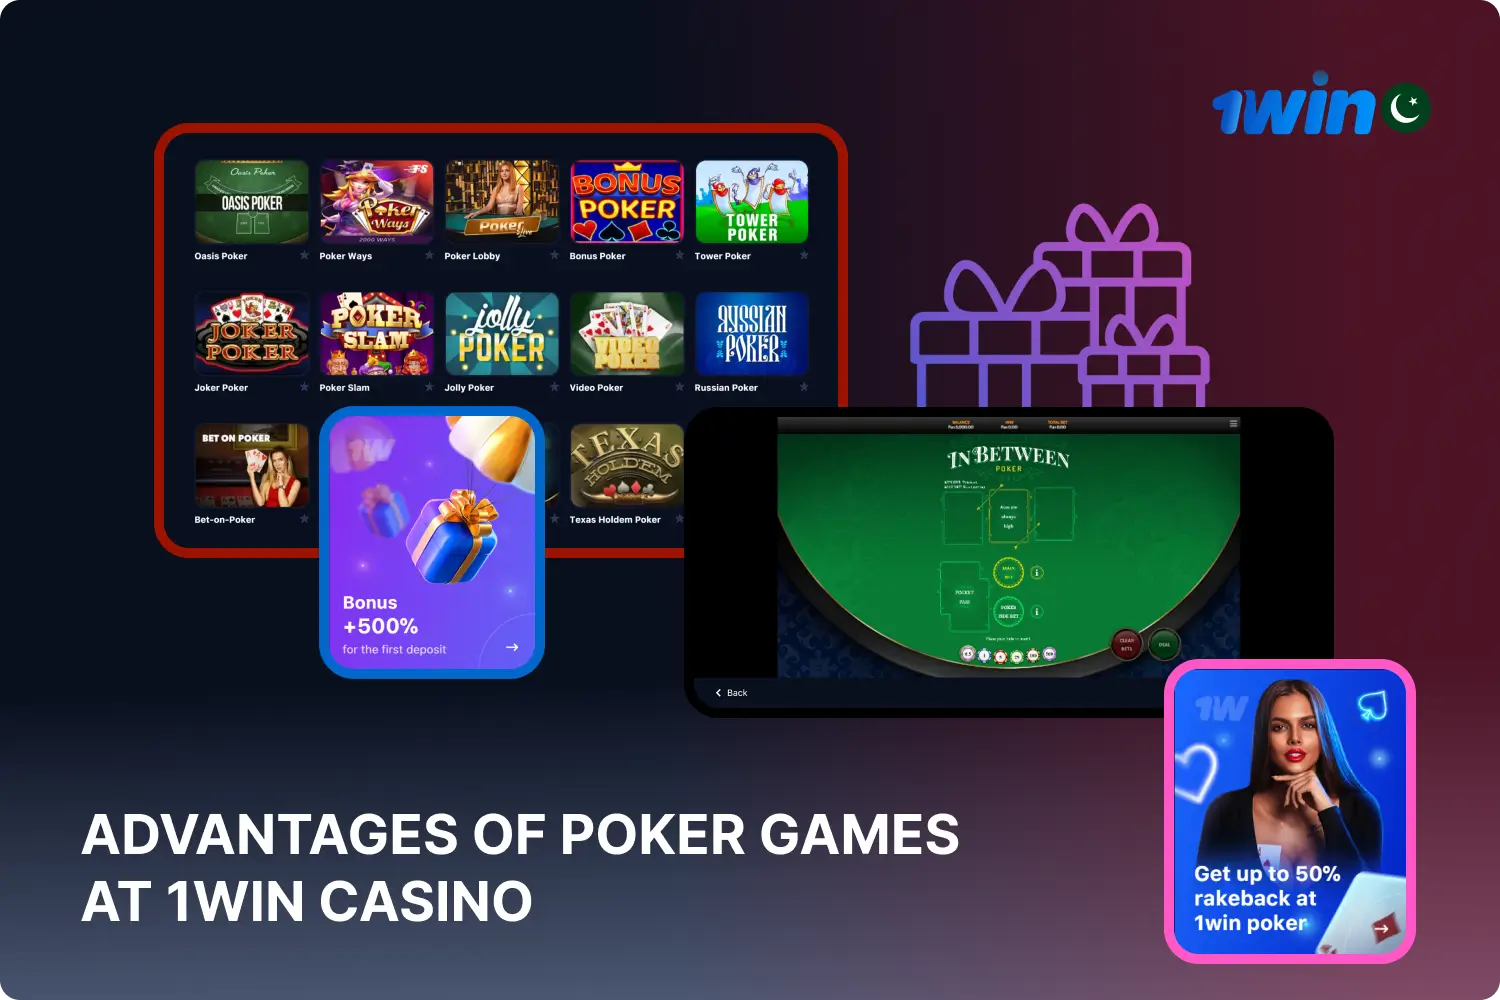 1win Poker offers Pakistani players a wide range of online games, tournaments, large welcome bonuses, regular rakeback, mobile app play and secure payment options